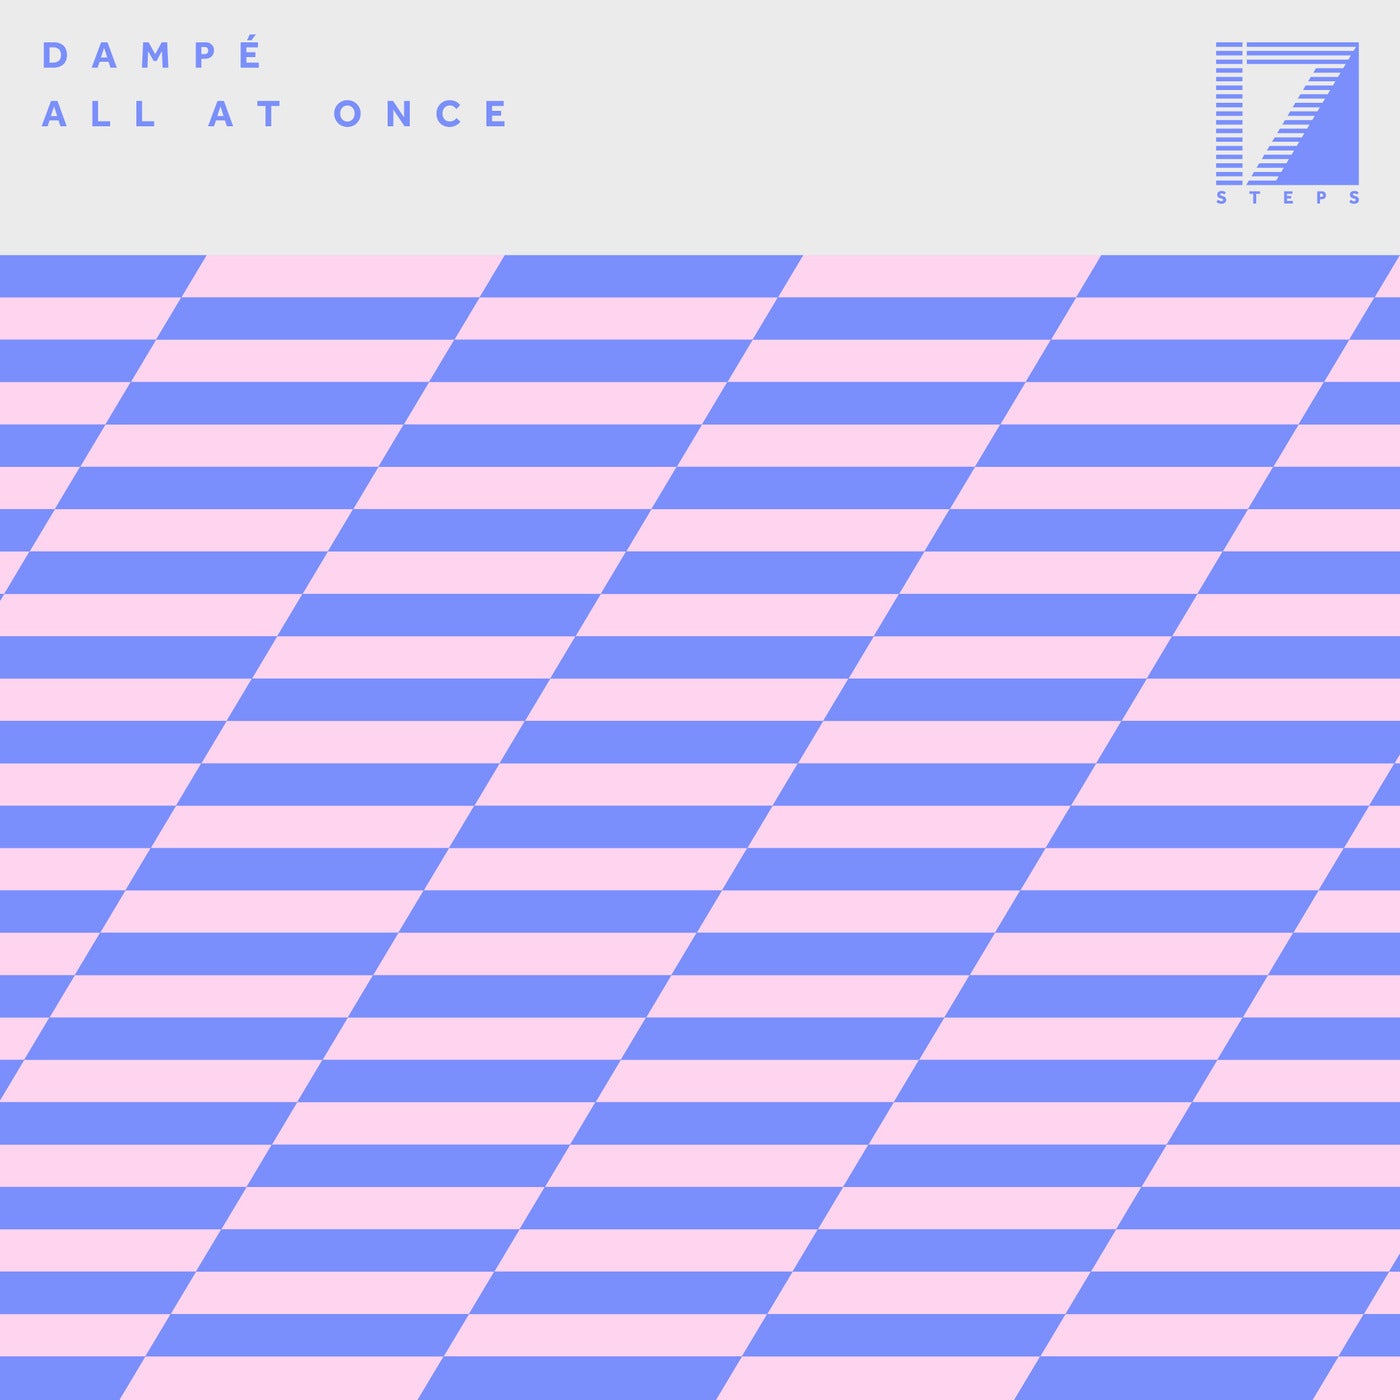 image cover: Dampe - All At Once on 17 Steps